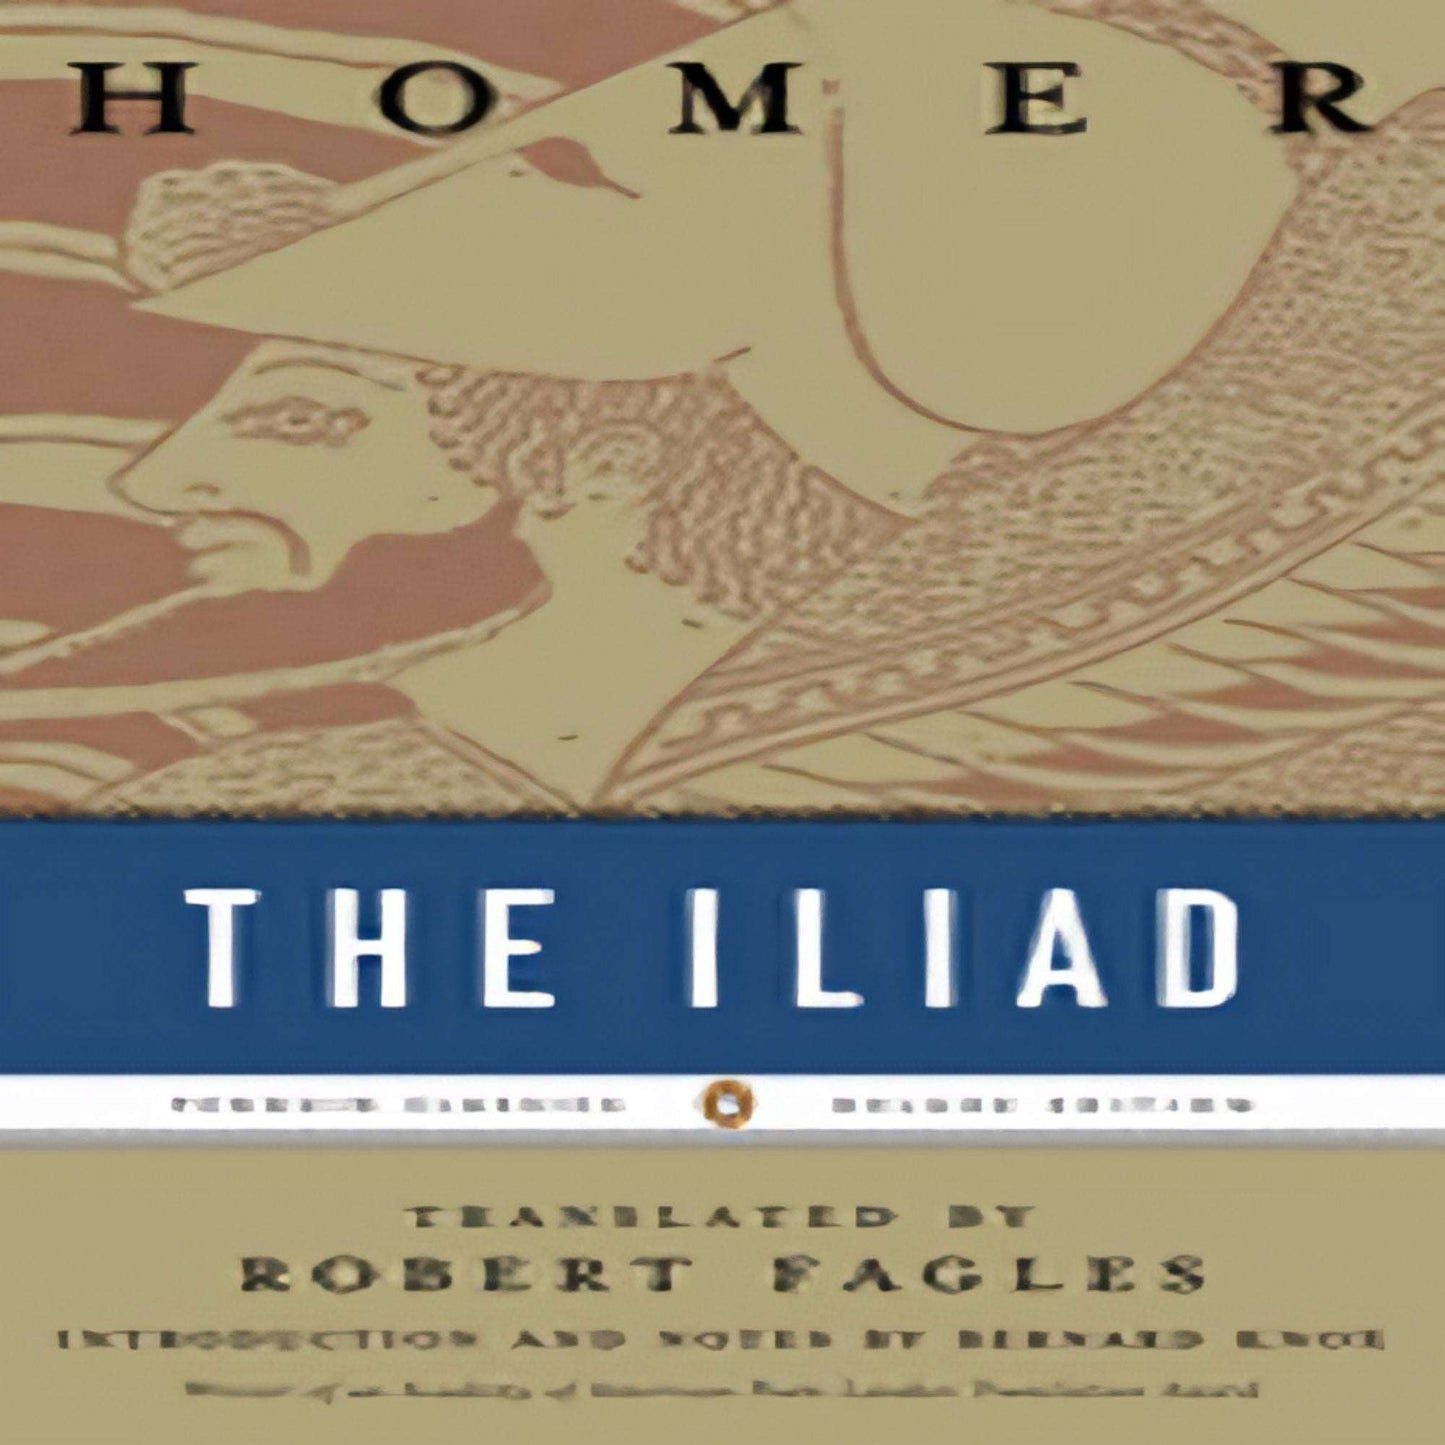 The Iliad: (Penguin Classics Deluxe Edition) (Revised) (Penguin Classics Deluxe Edition)192-030323-0140275363DPGBOOKSTORE.COM. Today's Bestsellers.